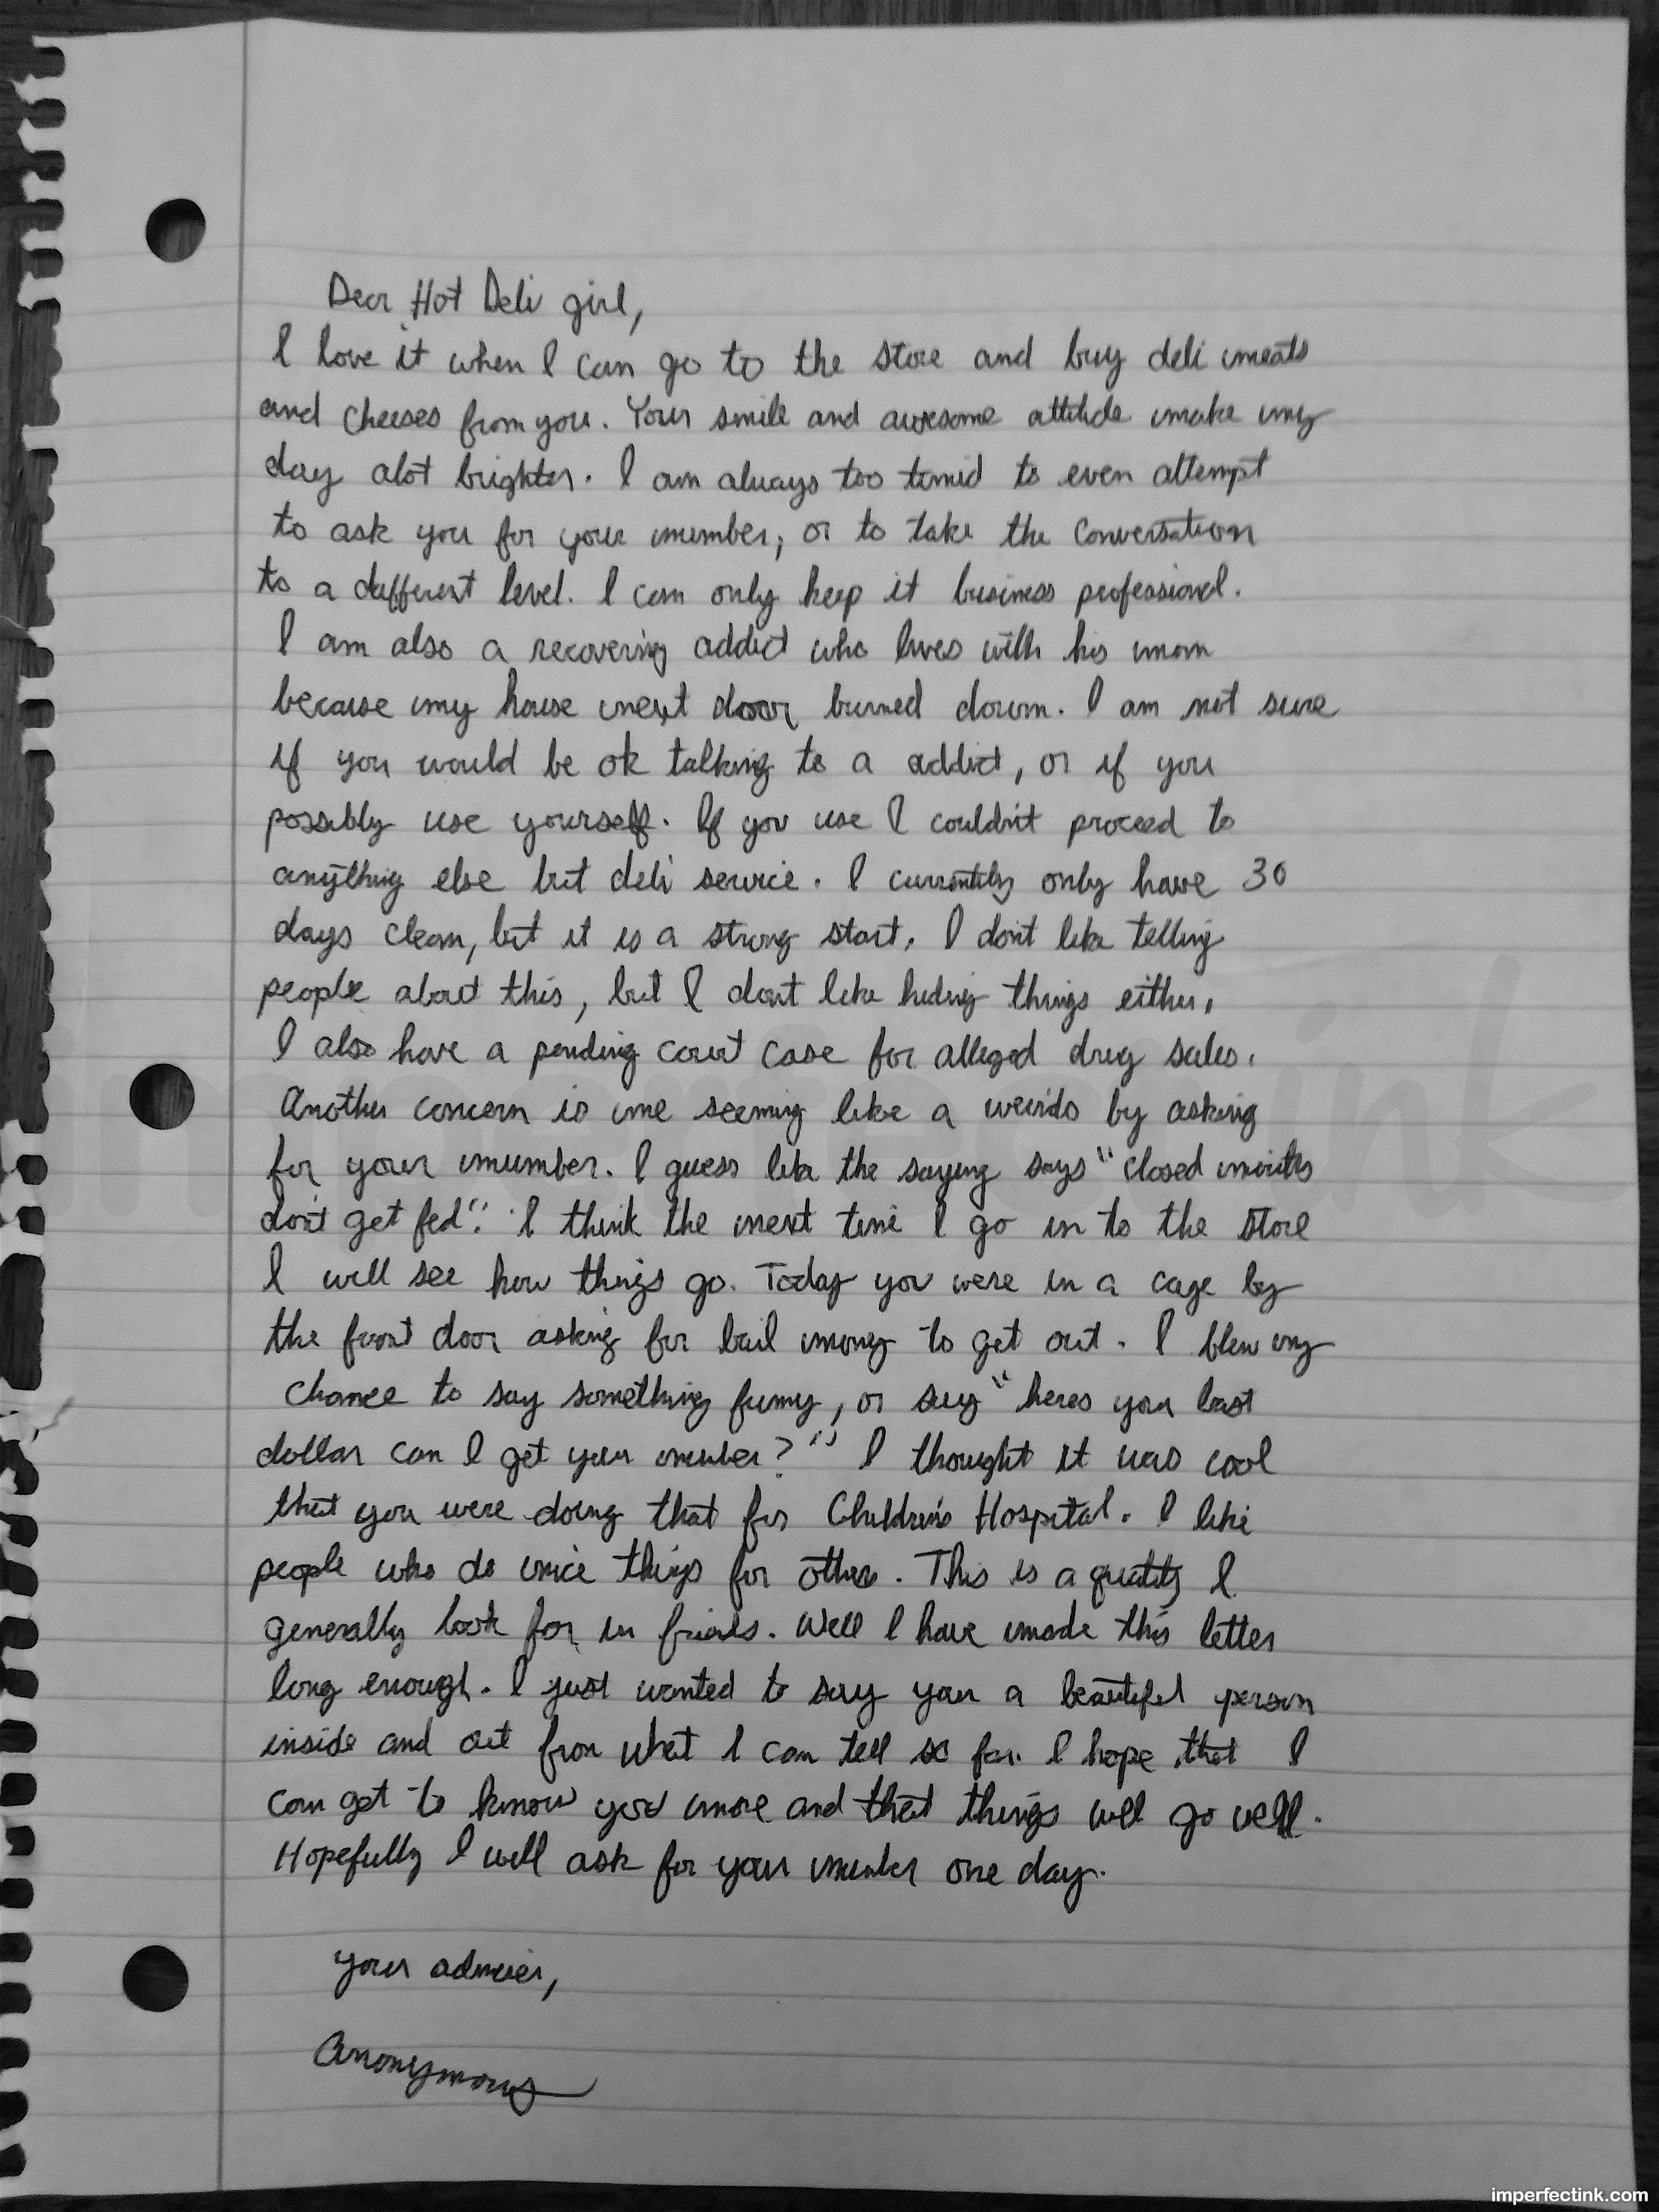 Read Handwritten Secret Crush Letters Shared Anonymously